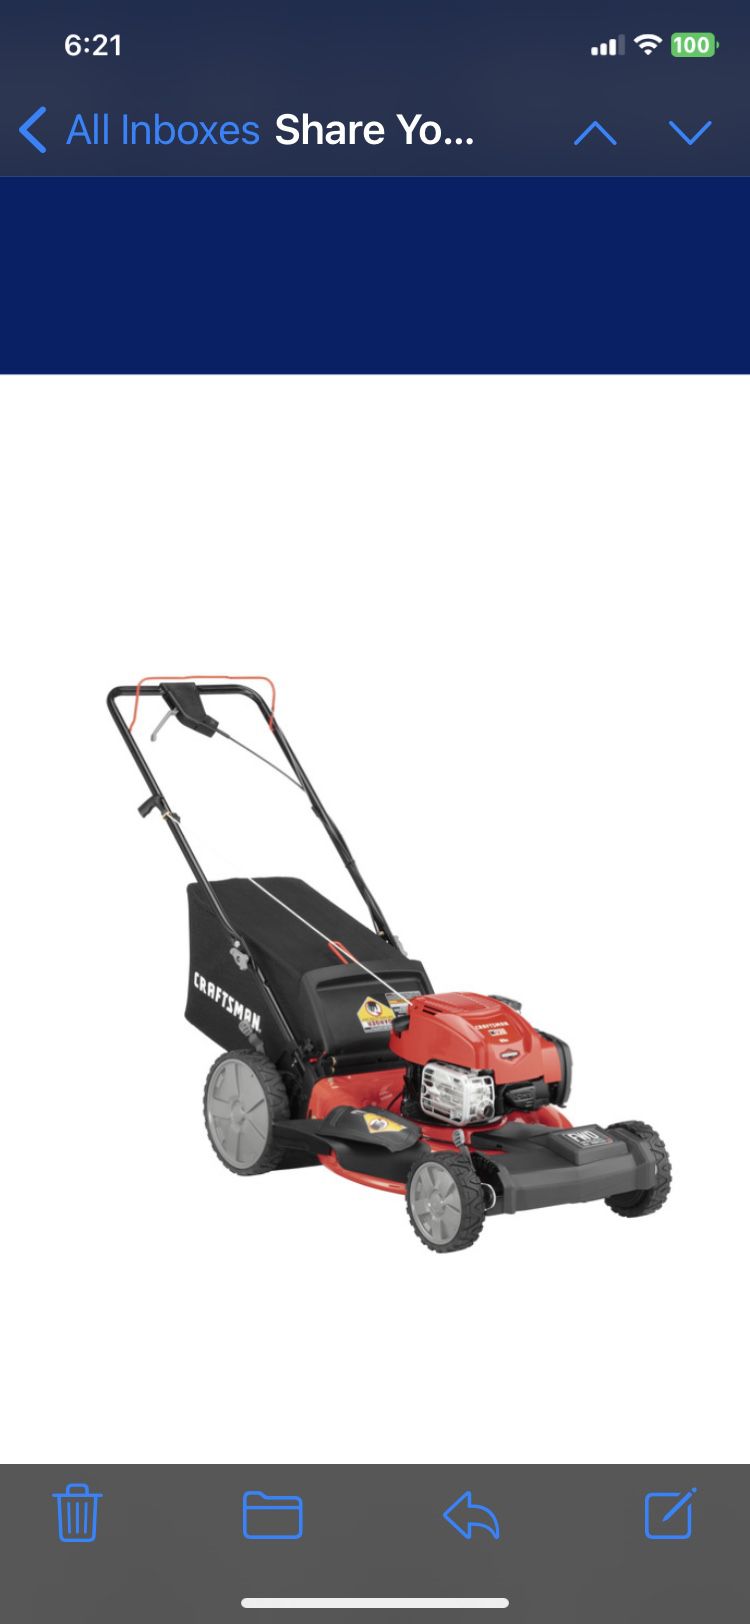 BRAND NEW! $300 OR BO!  CRAFTSMAN M230 163-cc 21-in Self-propelled Gas Lawn Mower with Briggs & Stratton Engine